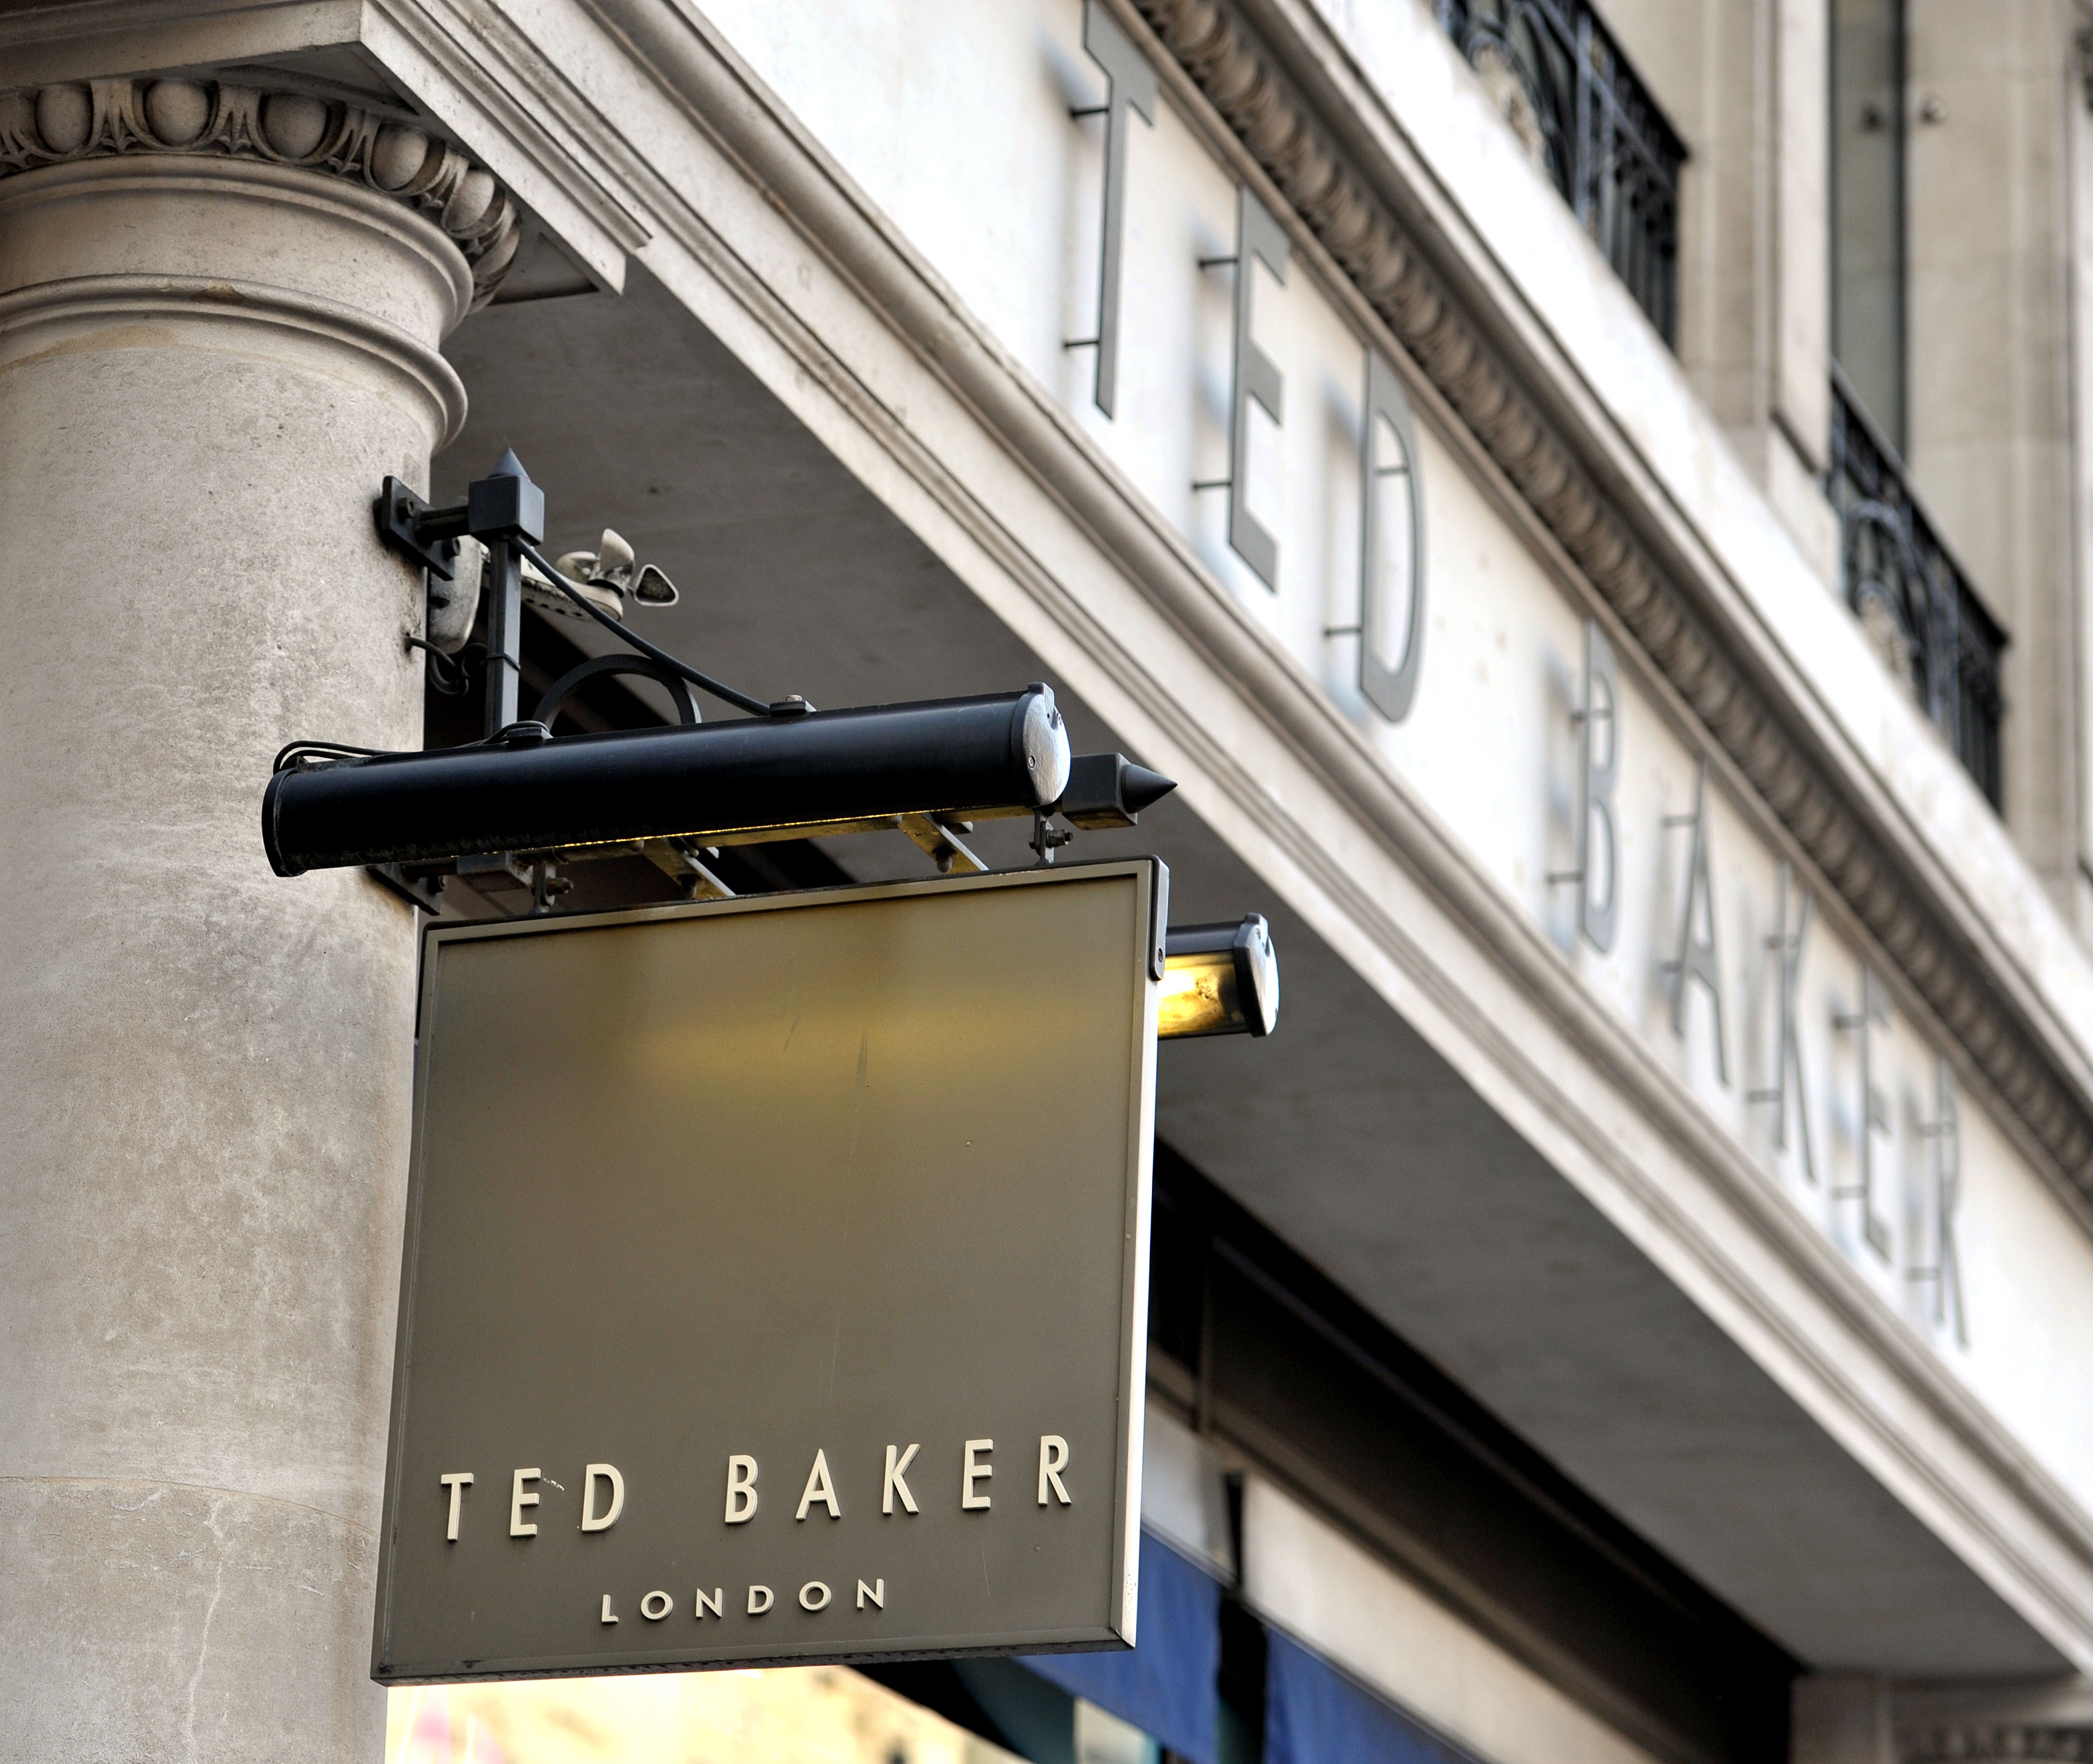 Mr Barton was appointed to the role after Ted Baker’s founder stepped down after allegations of improper behaviour (Nick Ansell/PA)